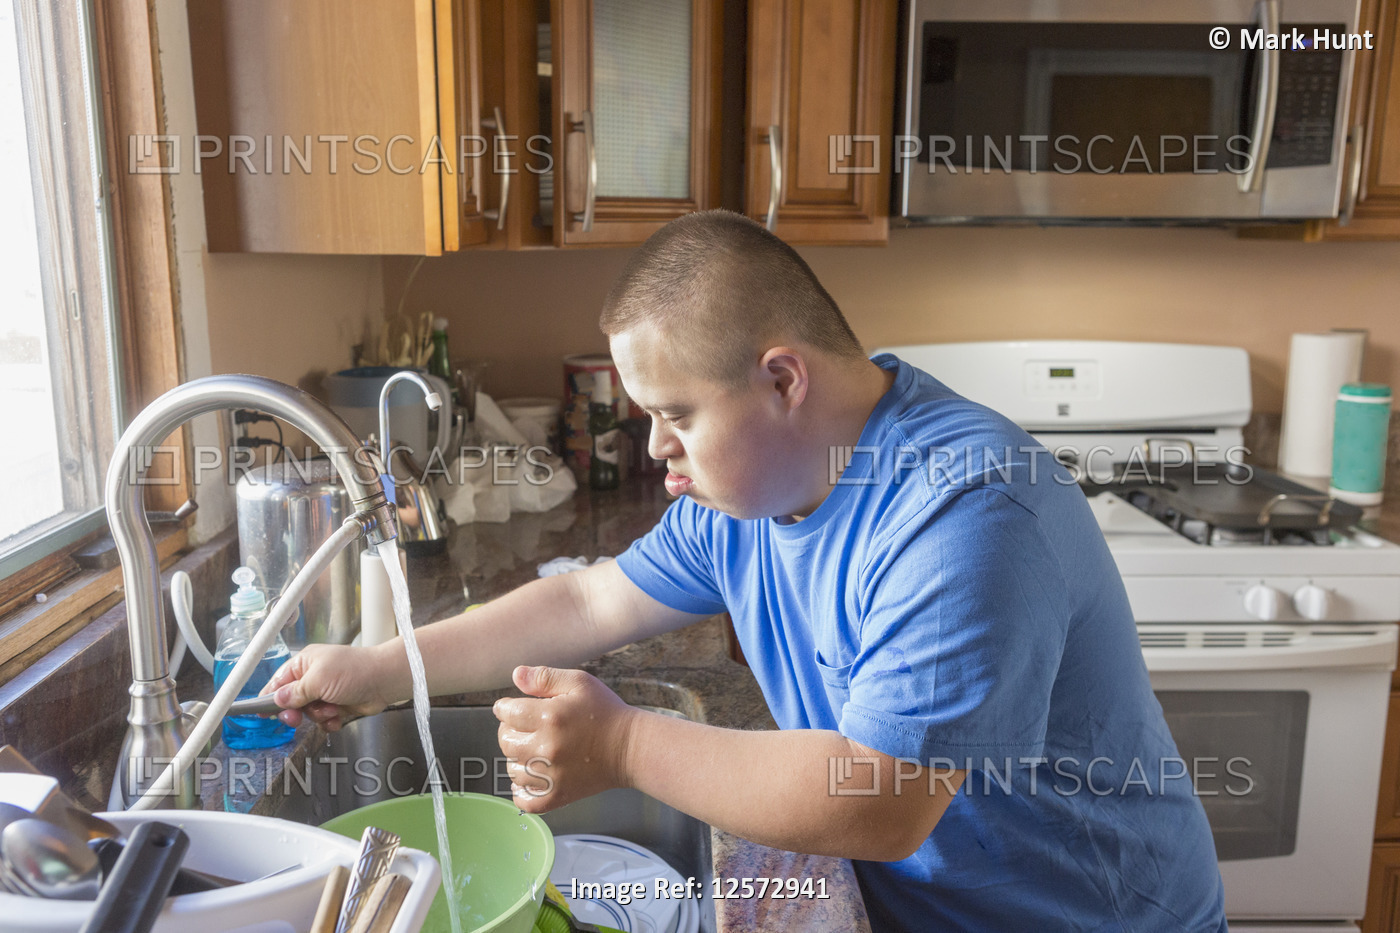 Teen with Down Syndrome doing dishes